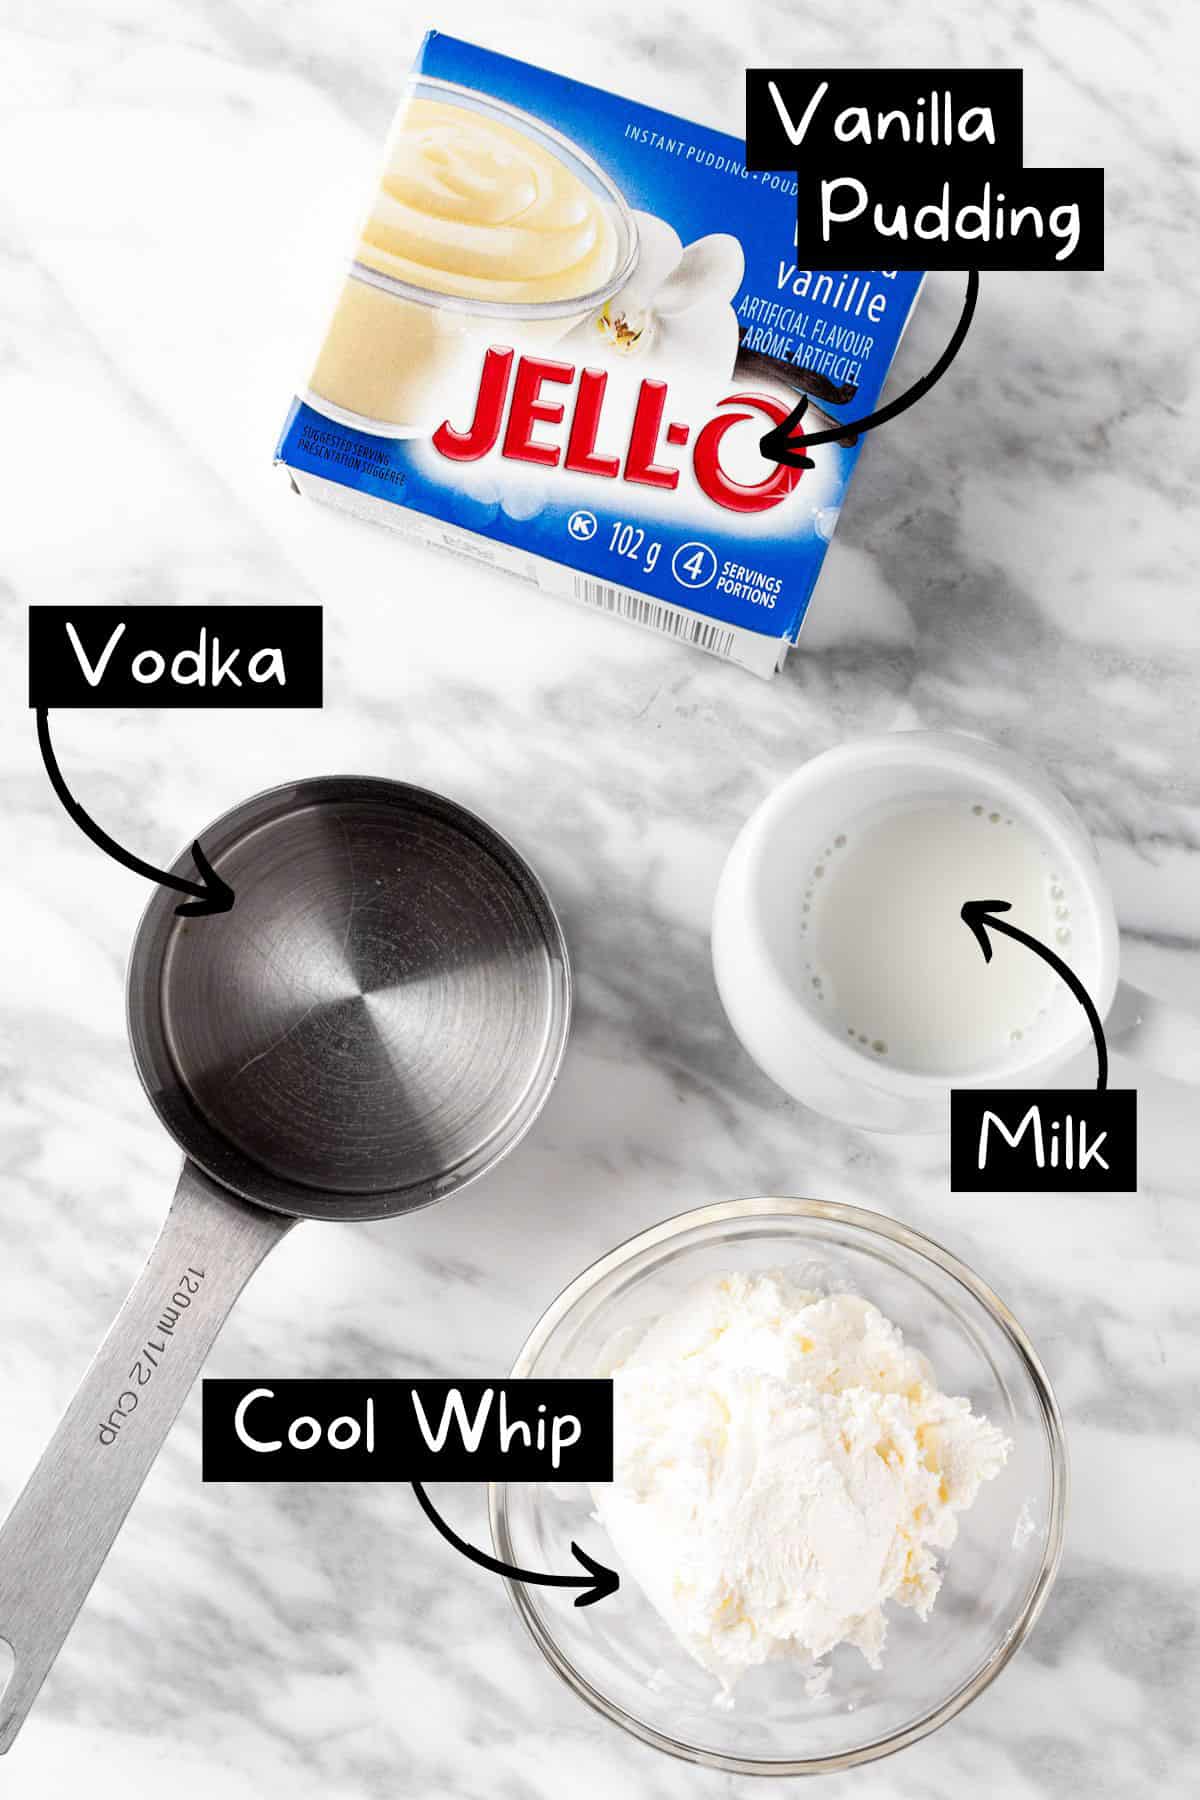 The ingredients needed to make the vanilla pudding shots.